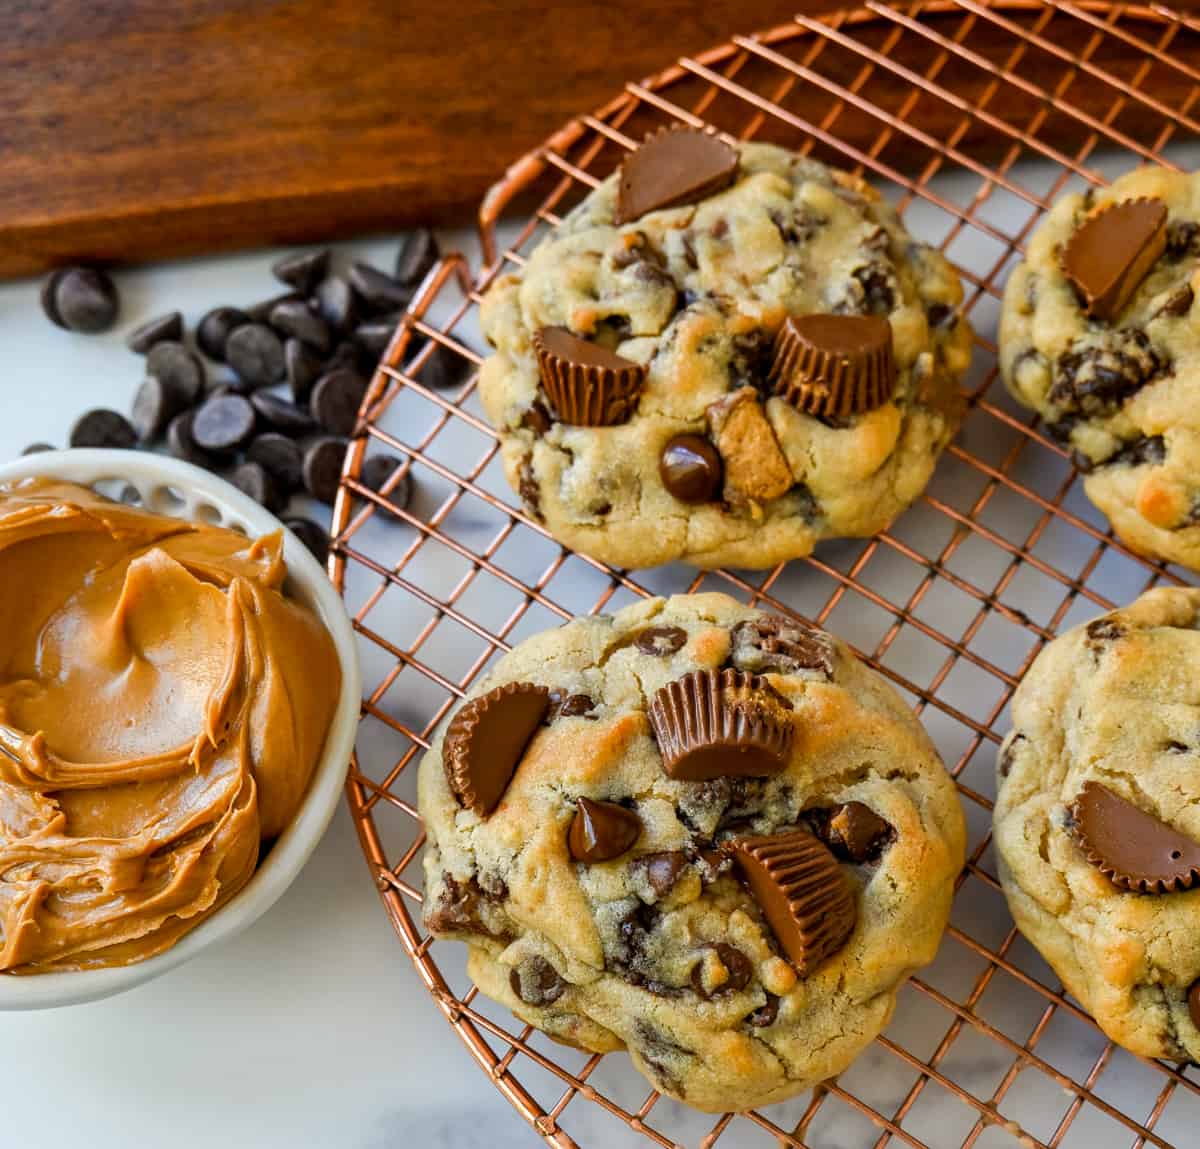 Reese's Chocolate Peanut Butter Cup Cookies. Soft, chewy, thick bakery-style chocolate peanut butter cup cookies made with Reese's peanut butter cups. Chocolate peanut butter lovers will love these cookies!